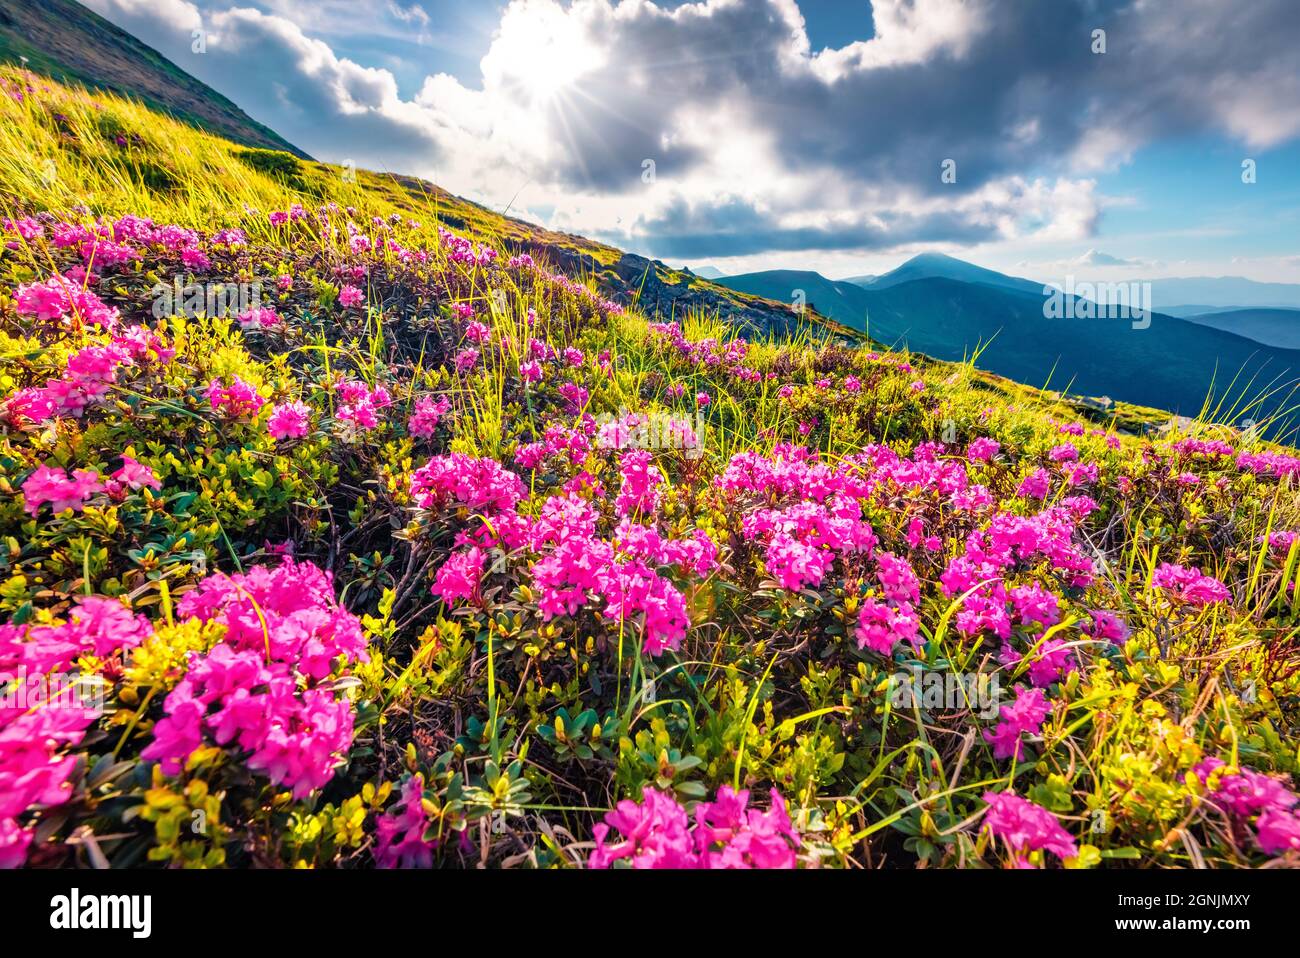 Blooming pink rhododendron flowers on Chornogora range. Colorful summer view of Carpathian mountains with highest peak Hoverla on background, Ukraine. Stock Photo